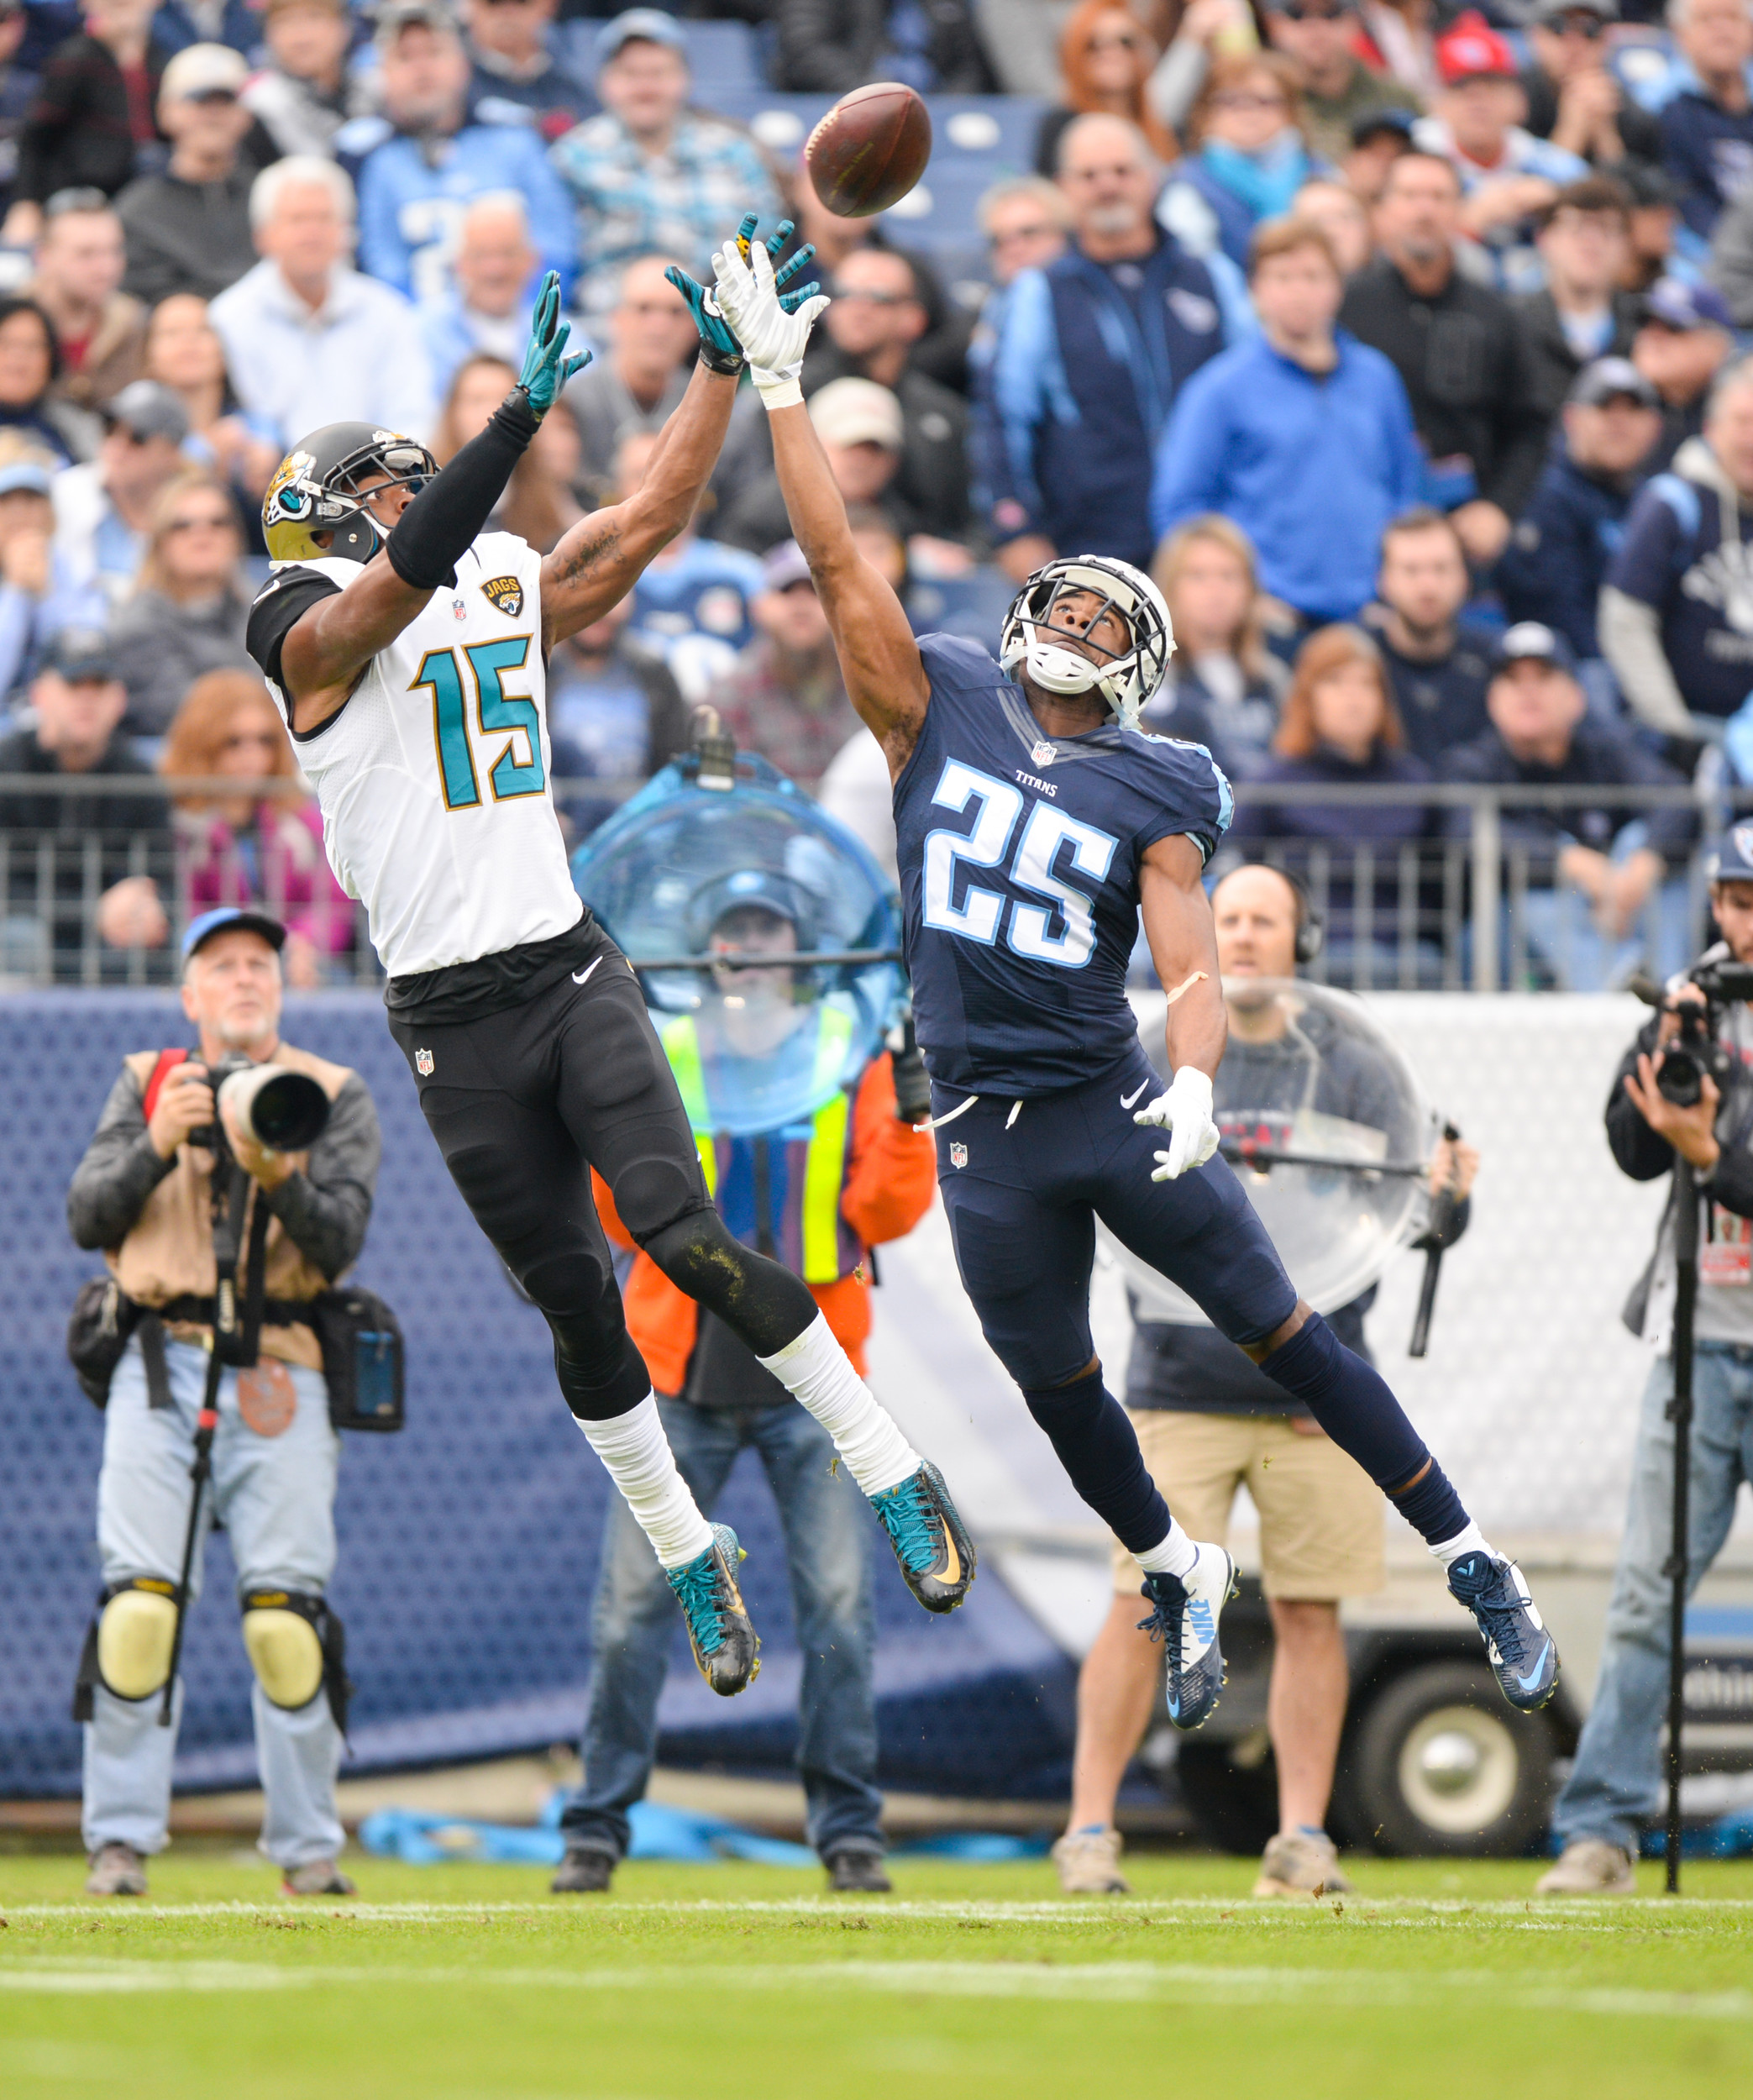 Jacksonville wide receiver Allen Robinson made 10 catches for 153 yards and three touchdowns against the Titans in the 42-39 loss at Tennessee.